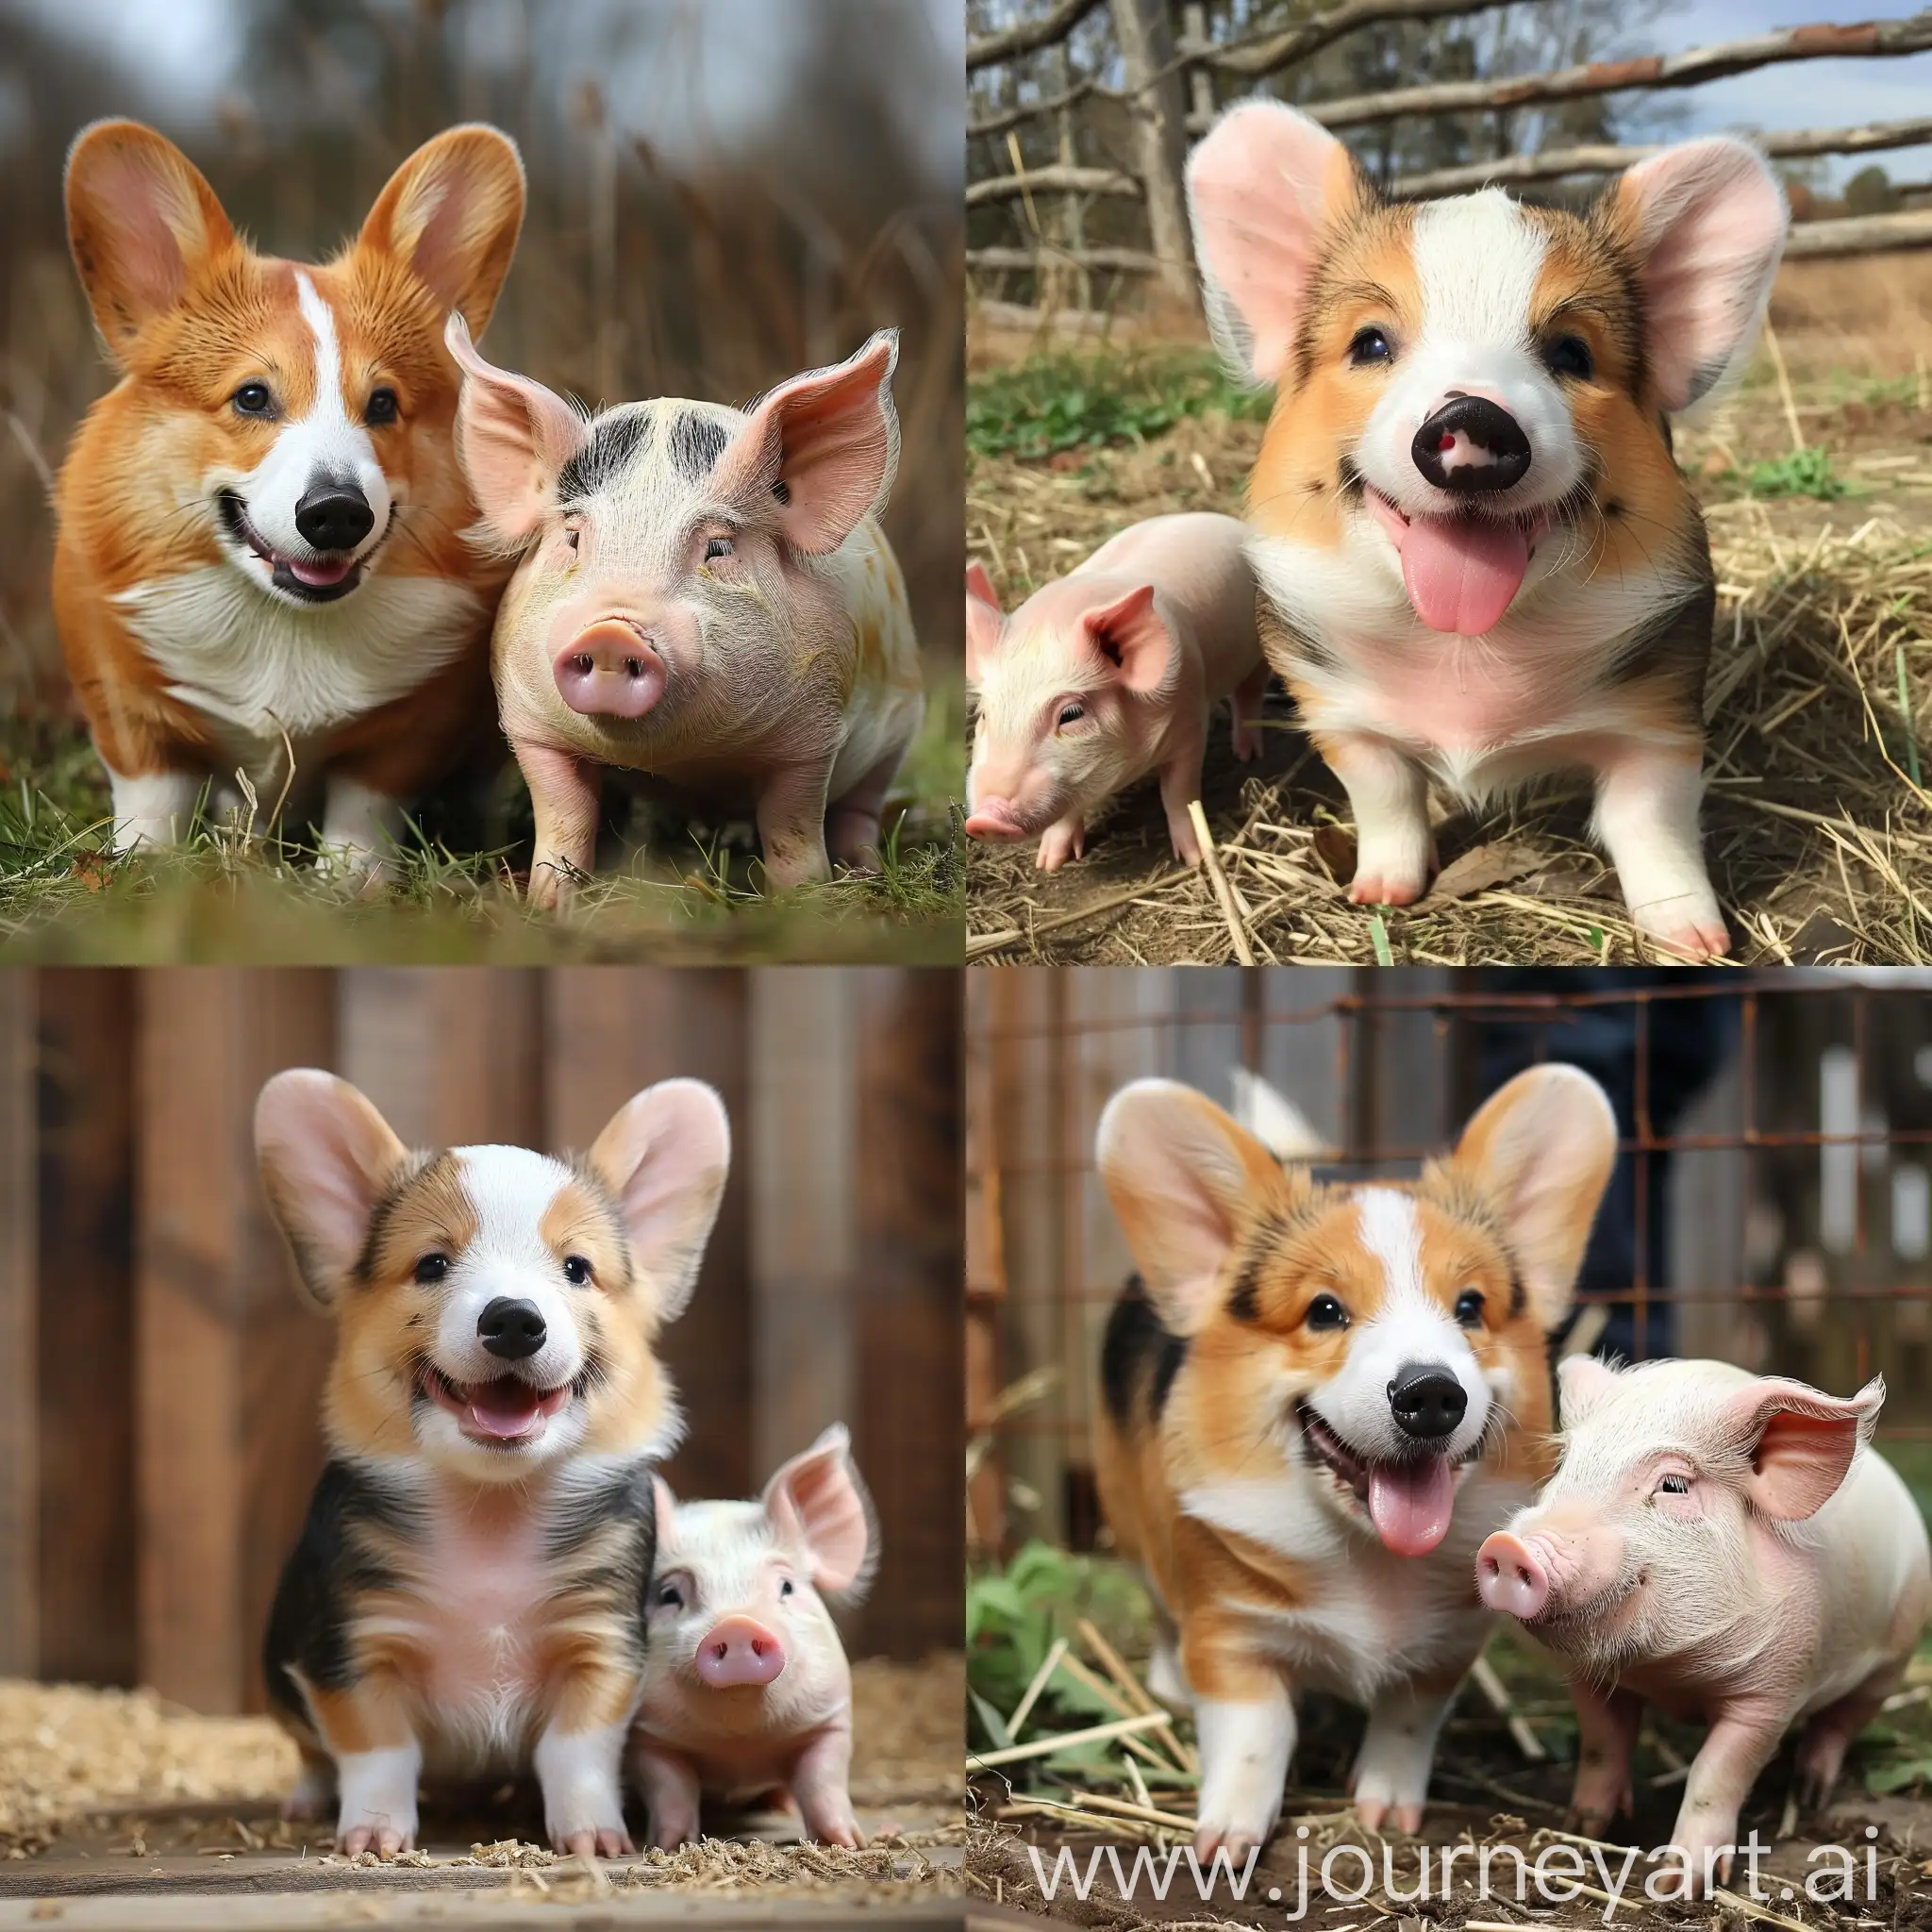 Adorable-CorgiPig-Friendship-Playful-Duo-in-a-Vibrant-Meadow